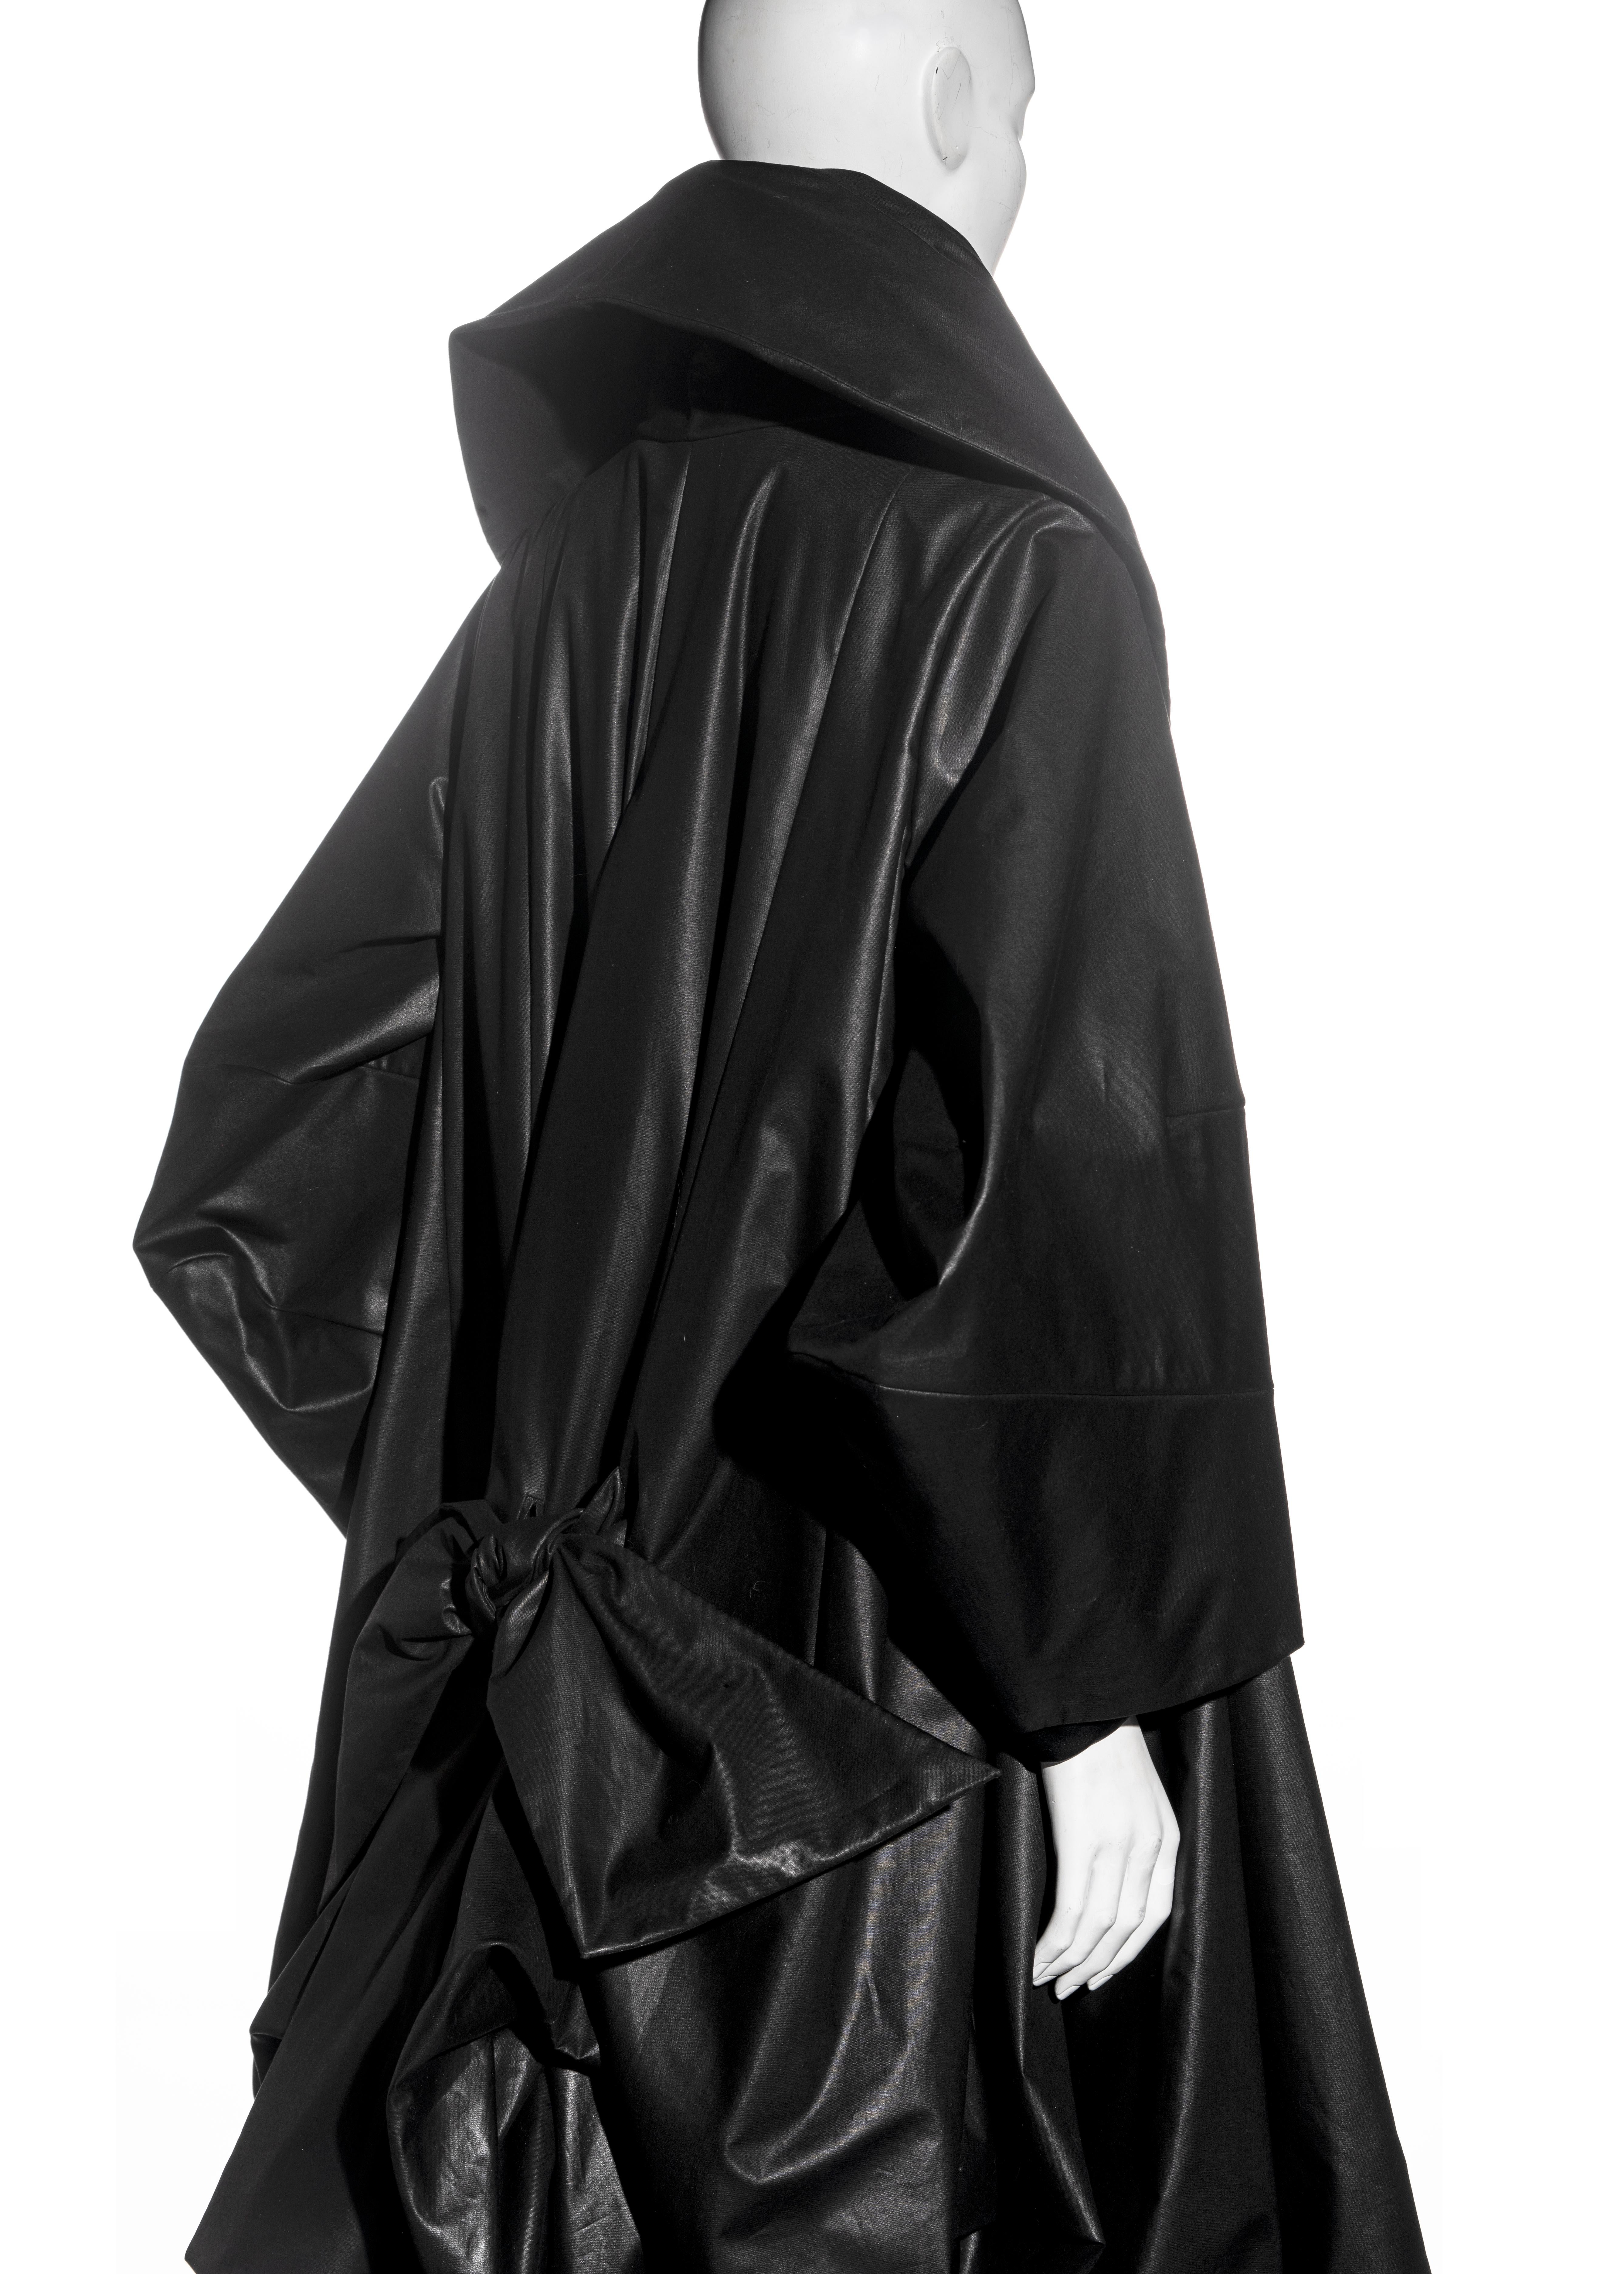 Christian Dior by John Galliano black waxed cotton opera coat, ss 1999 For Sale 4